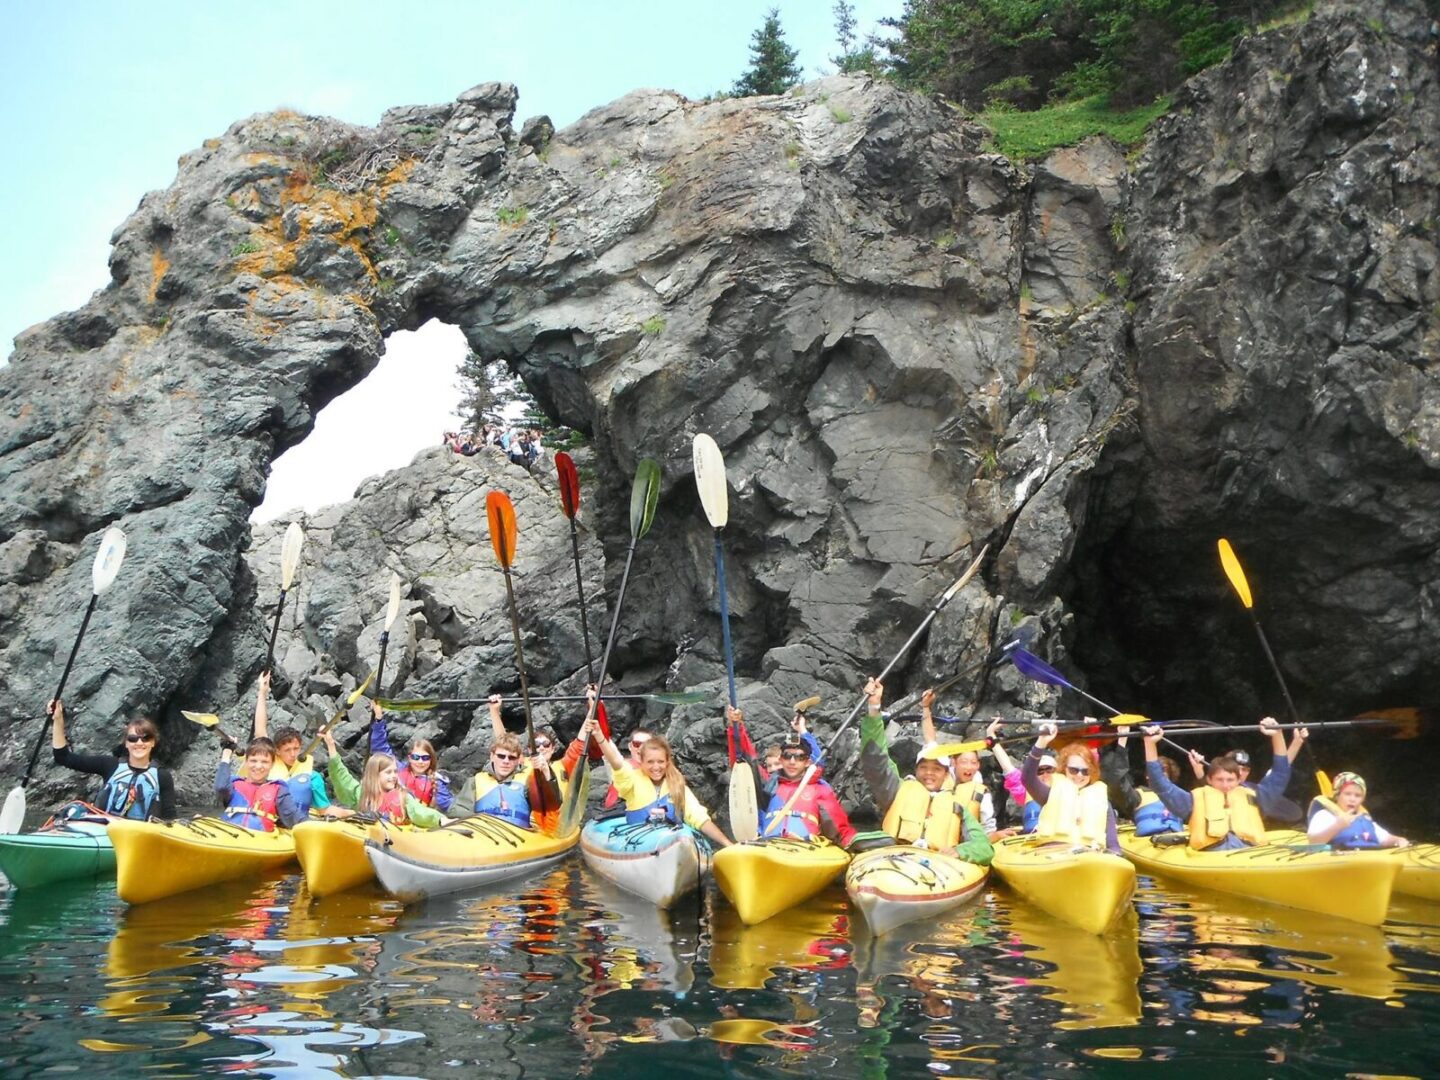 A group of people in kayaks in front of a rock formation.